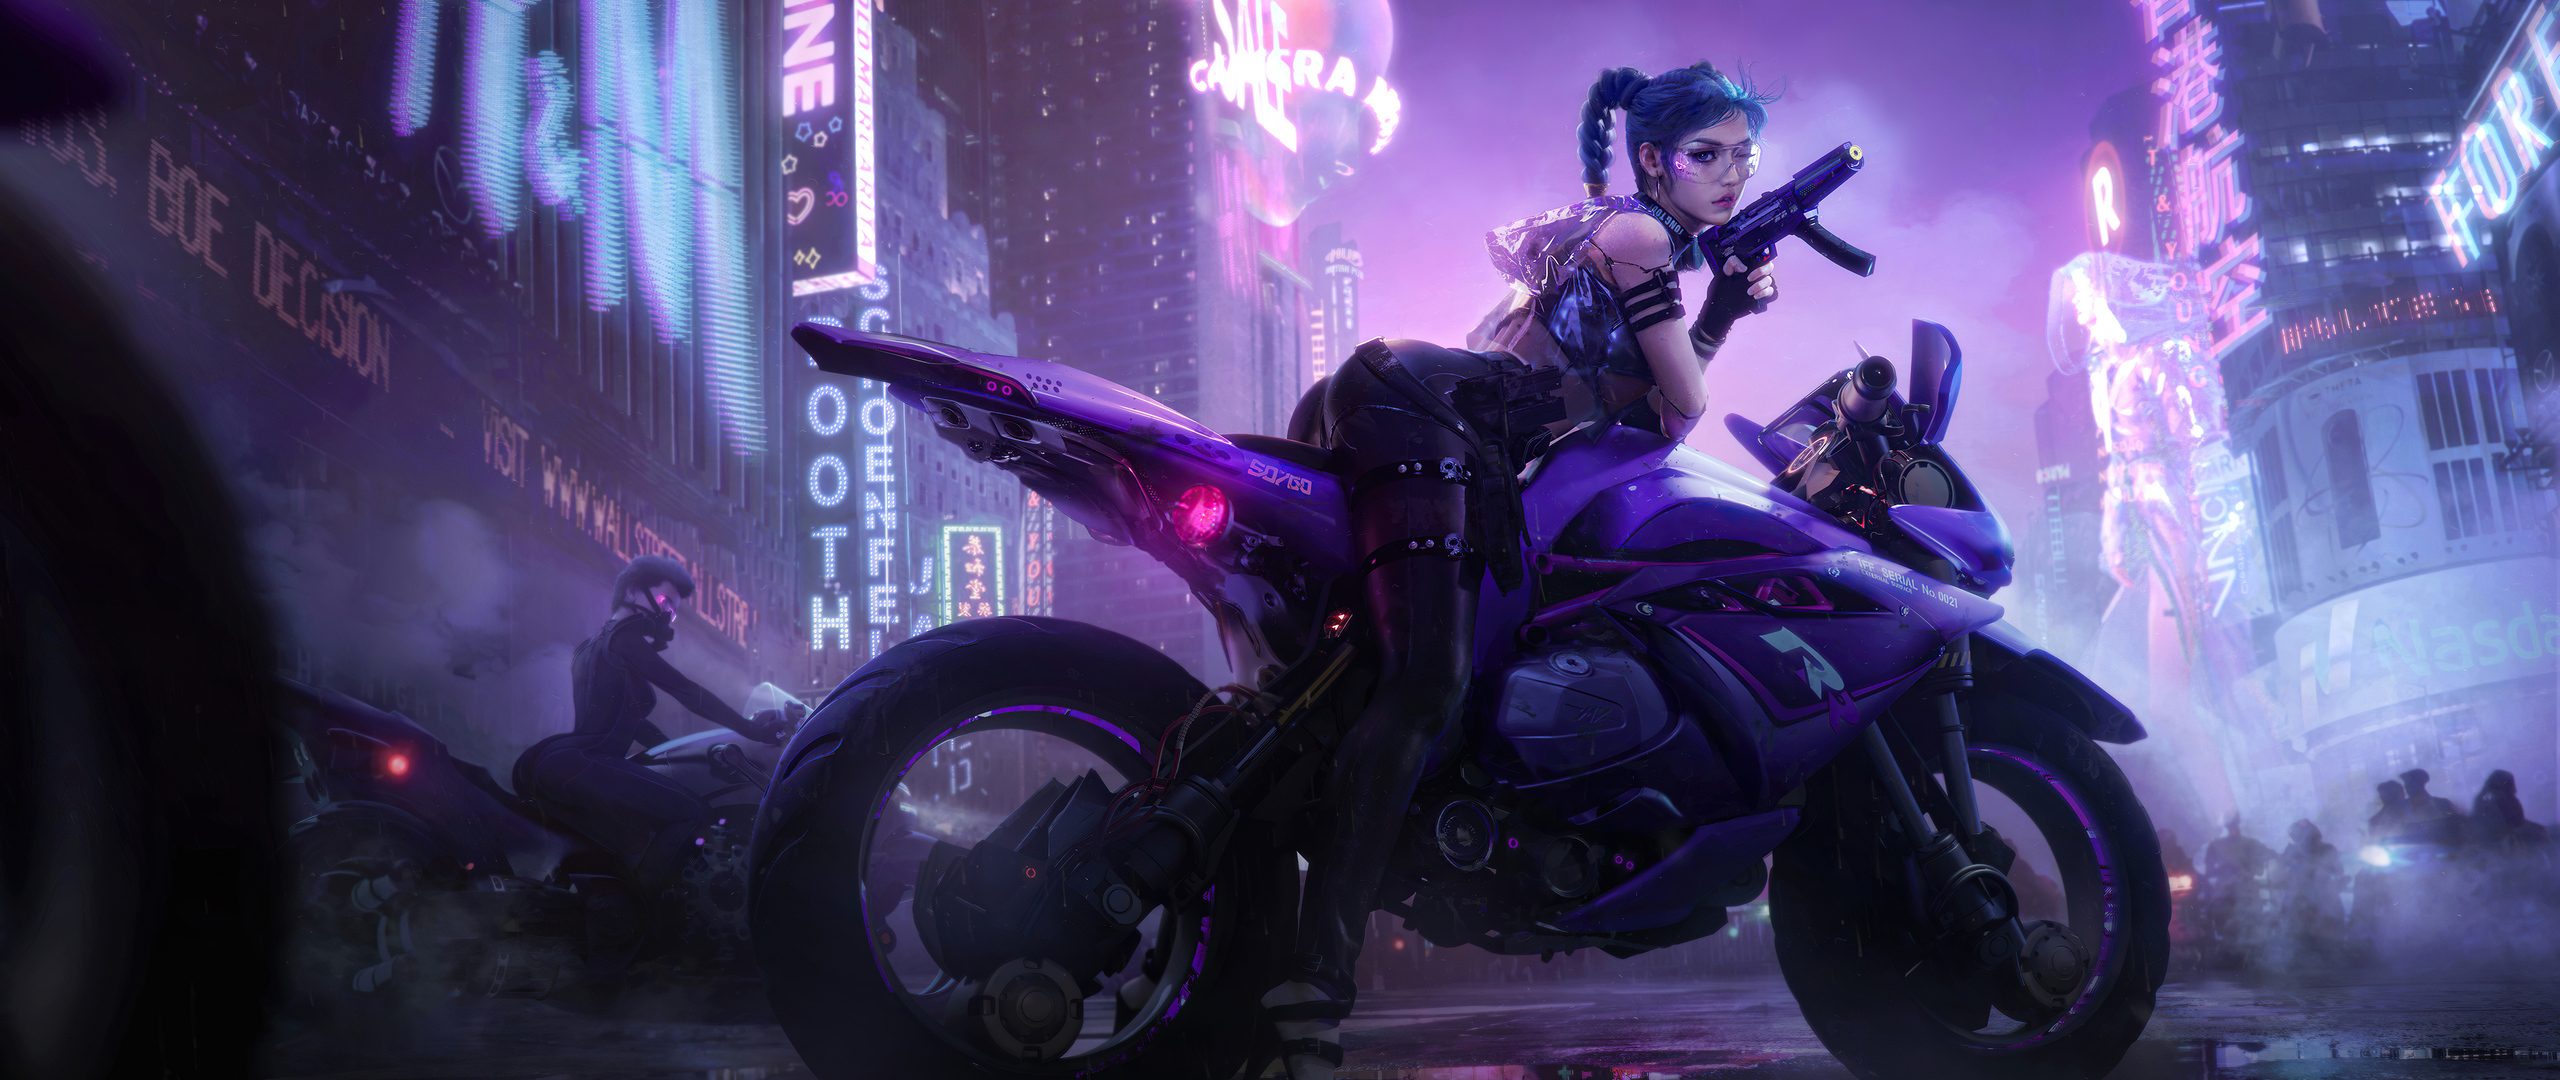 Cyberpunk wallpaper for android фото 110